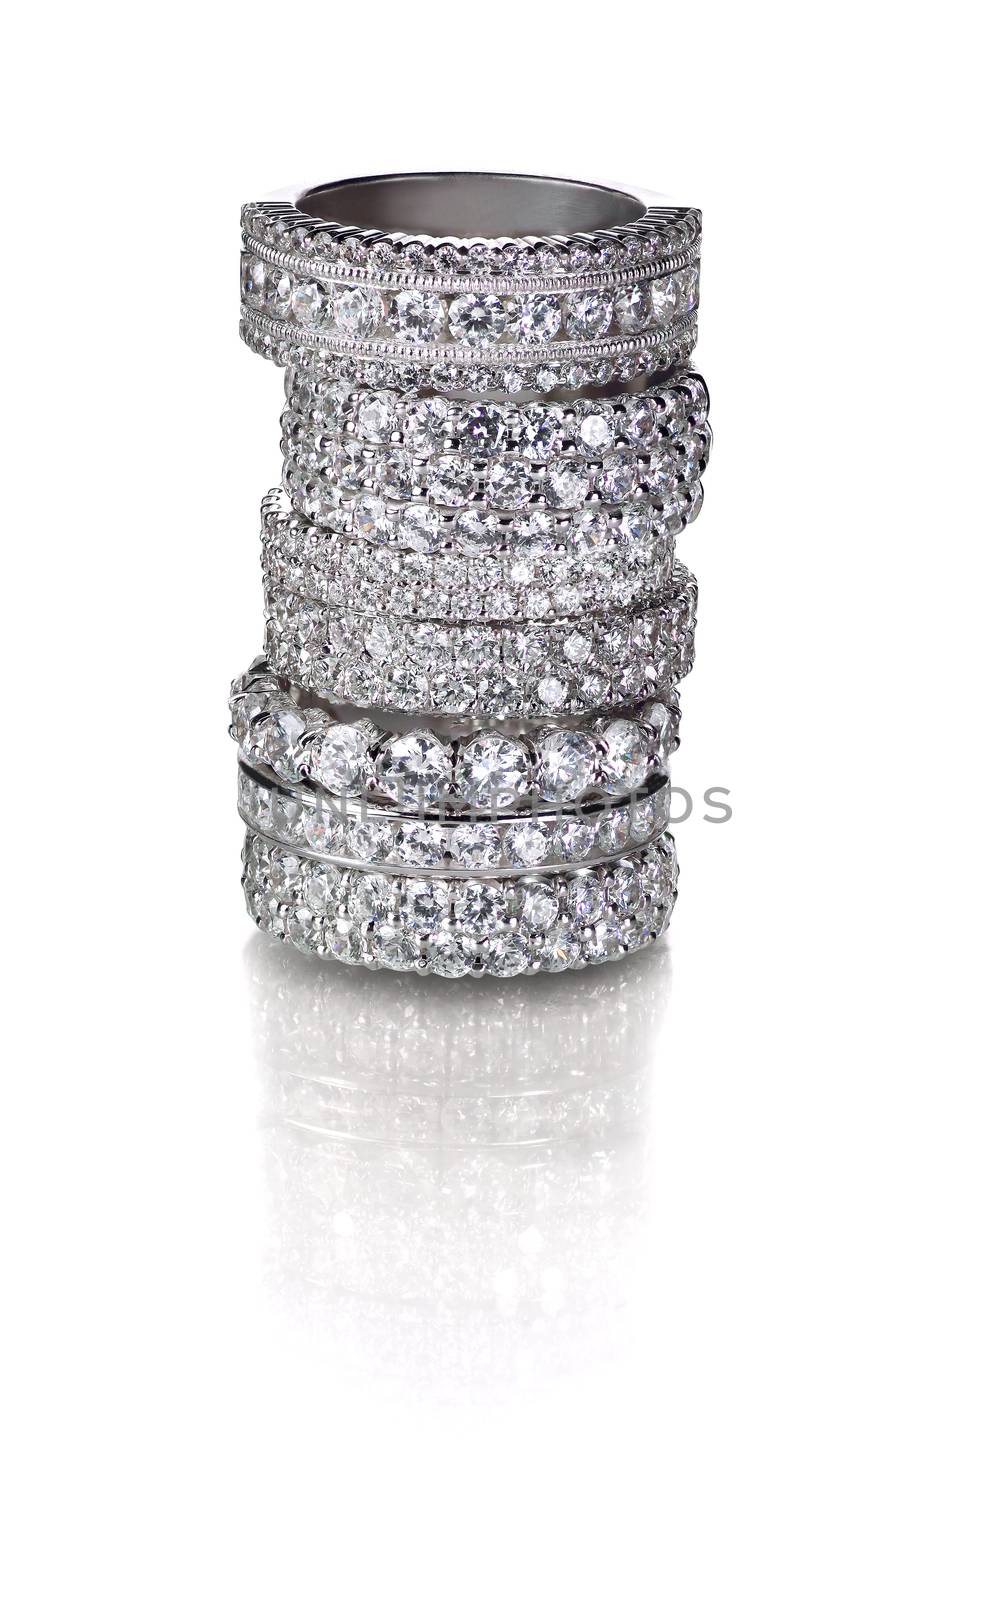 Cluster stack of diamond wedding engagment rings by fruitcocktail